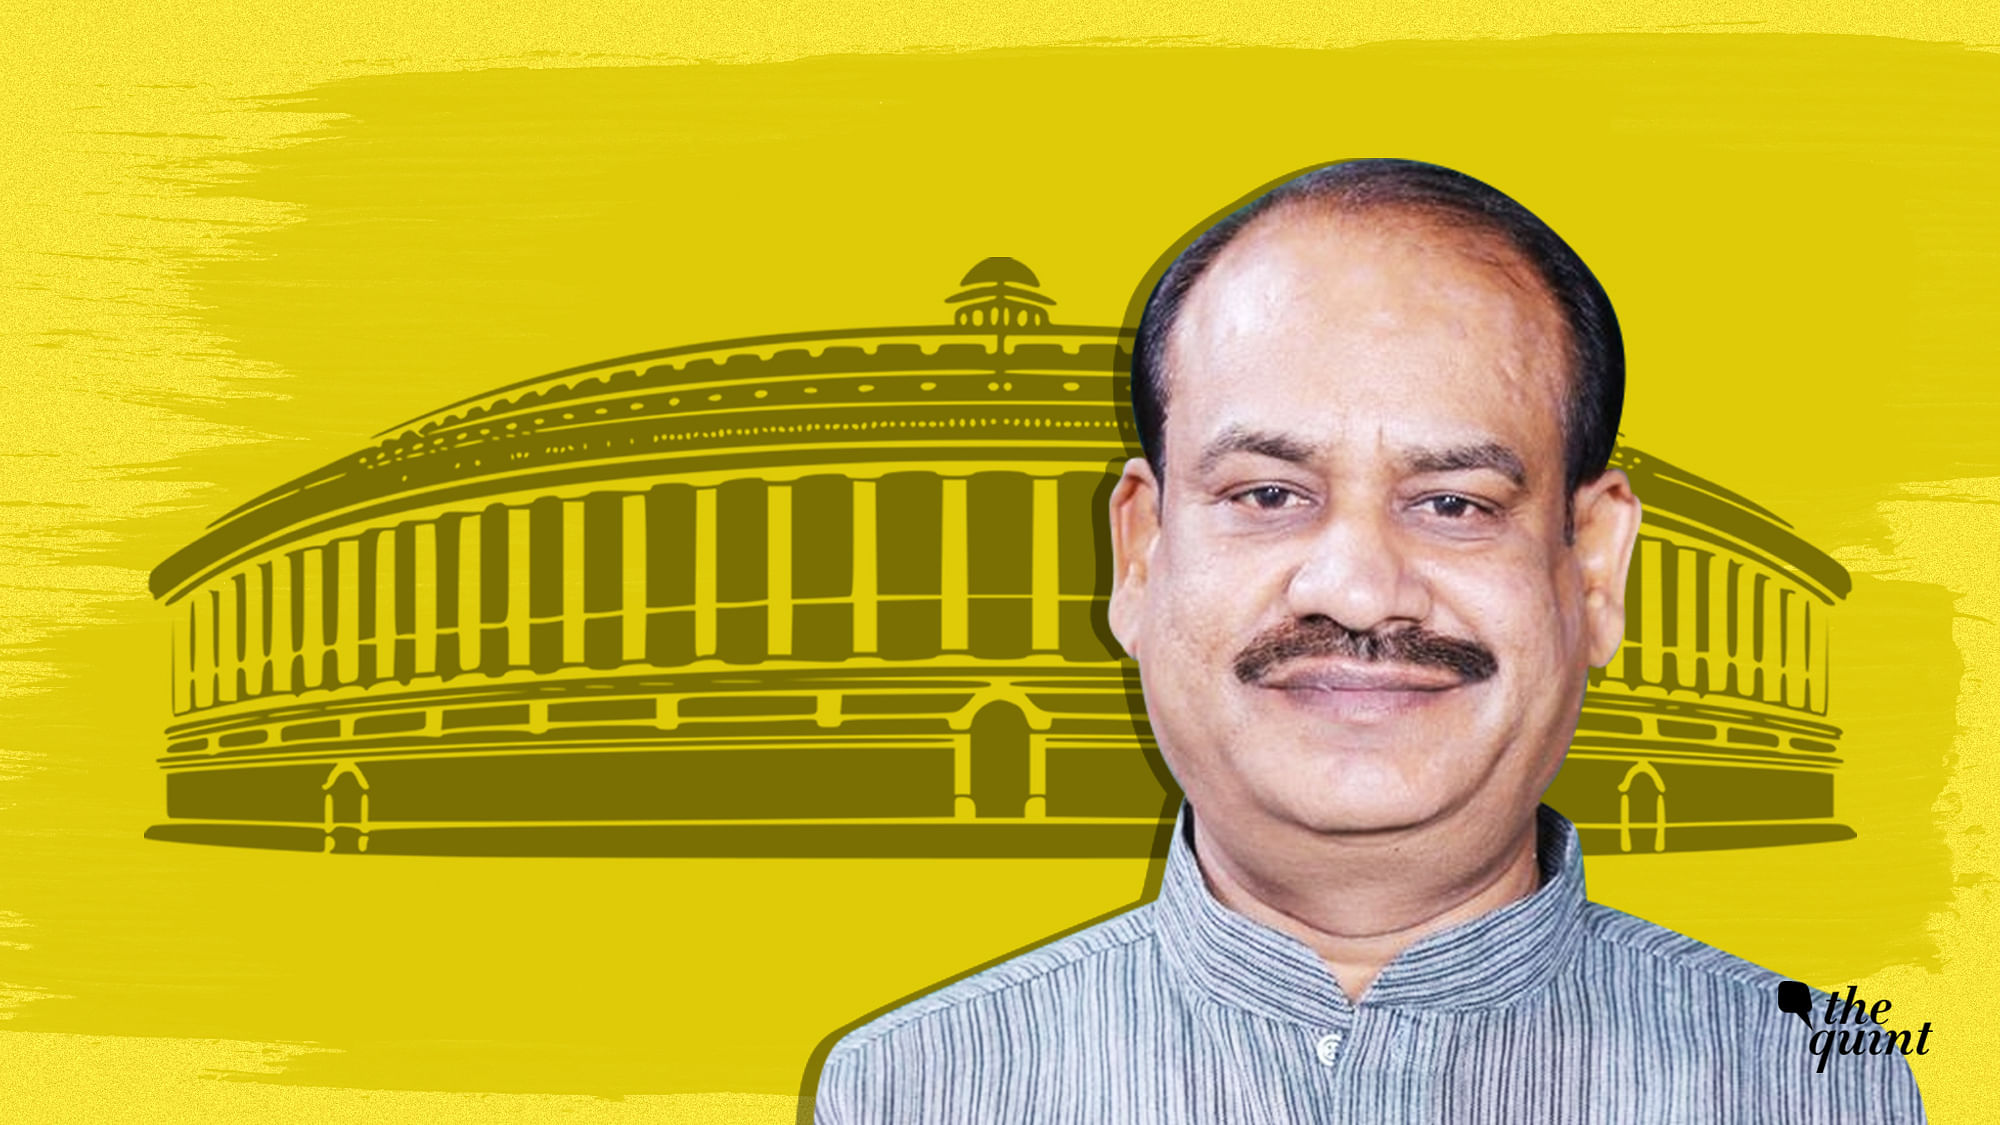 Om Birla, 56, is a two-time Member of Parliament from Kota constituency in Rajasthan.